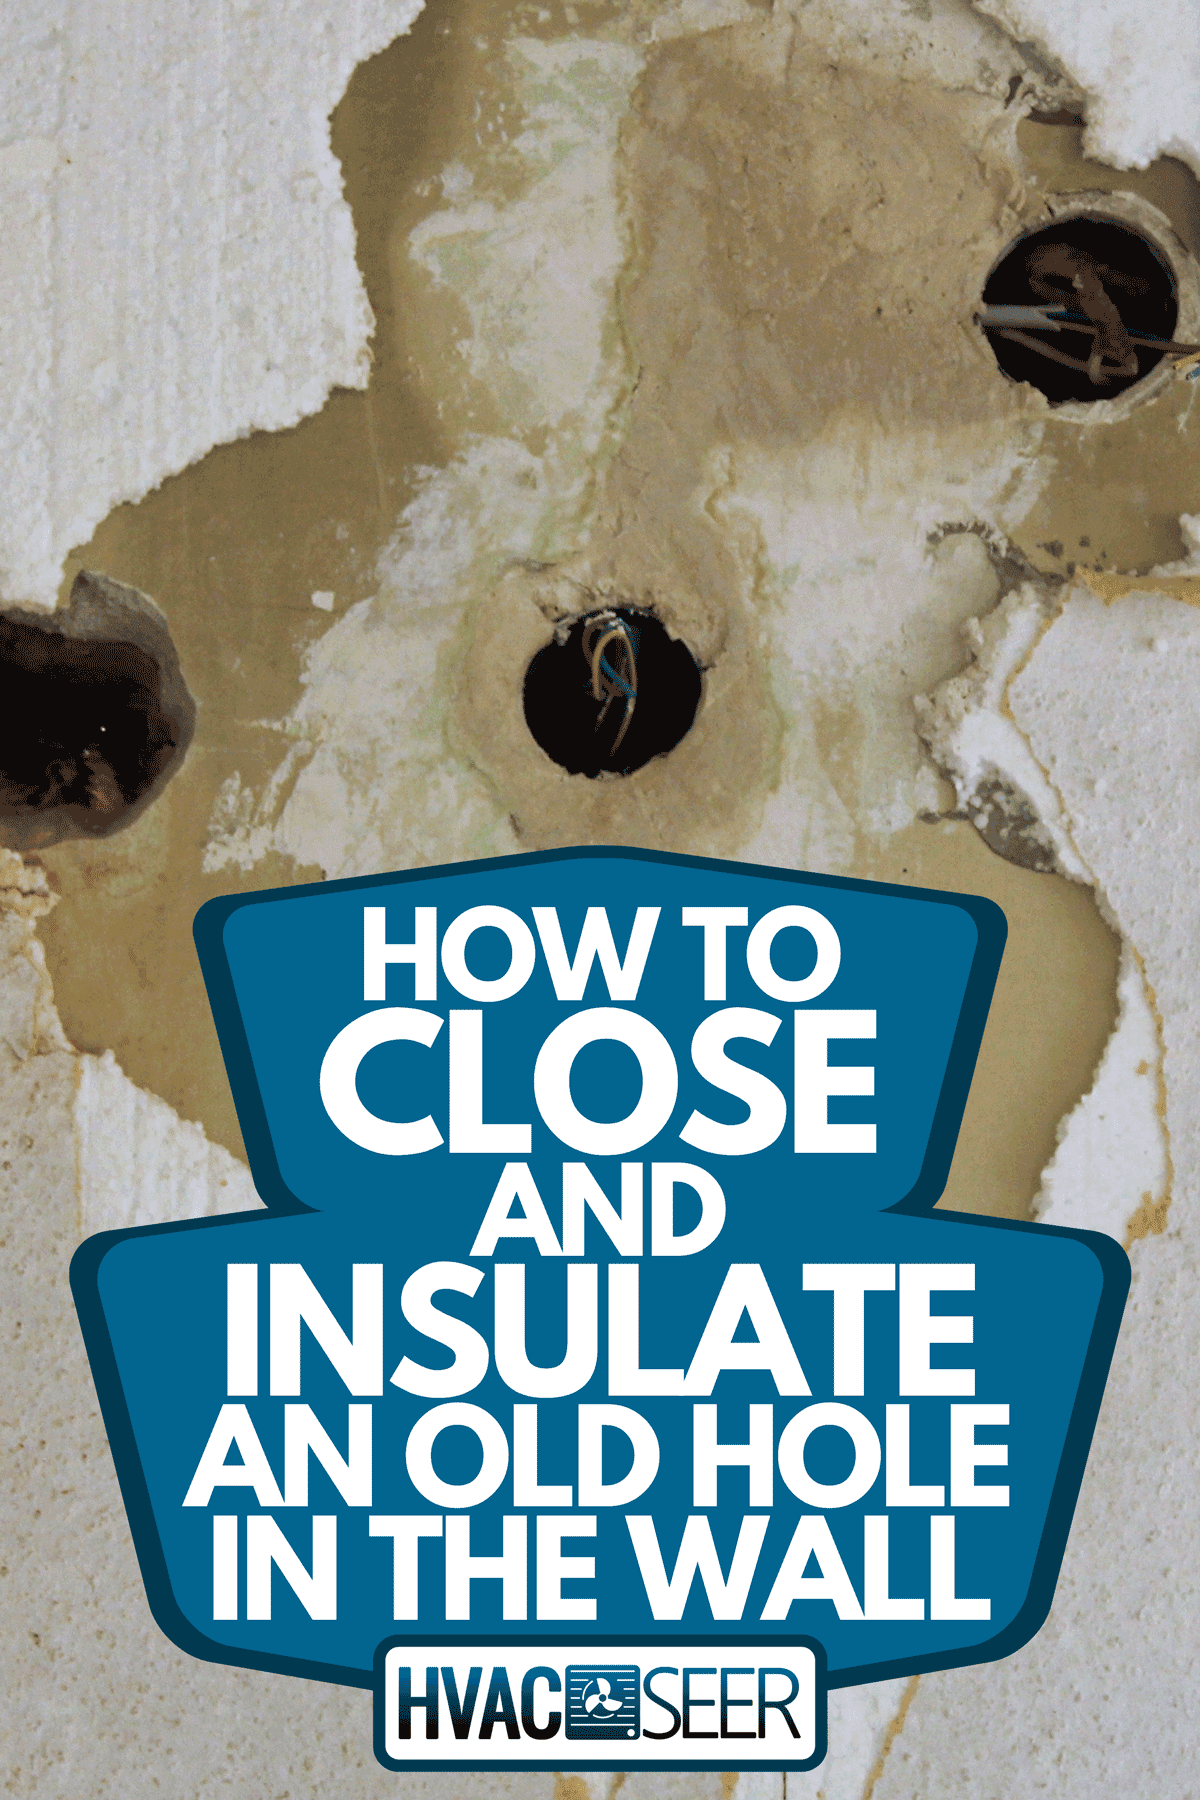 A building wall in bad condition, How To Close And Insulate An Old Hole In The Wall